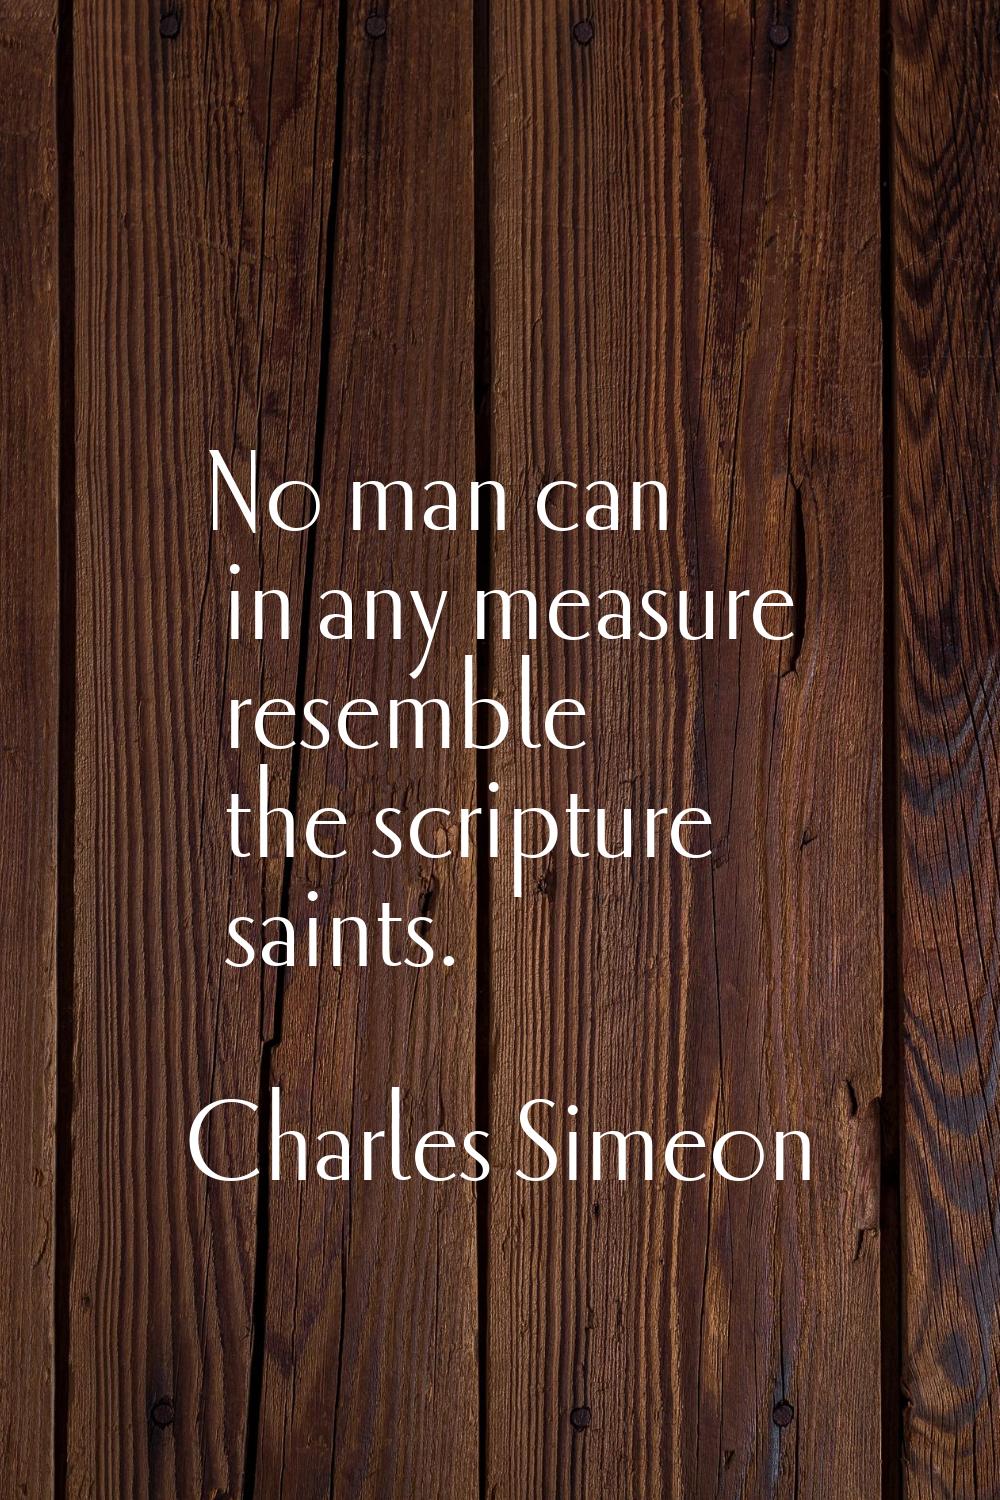 No man can in any measure resemble the scripture saints.